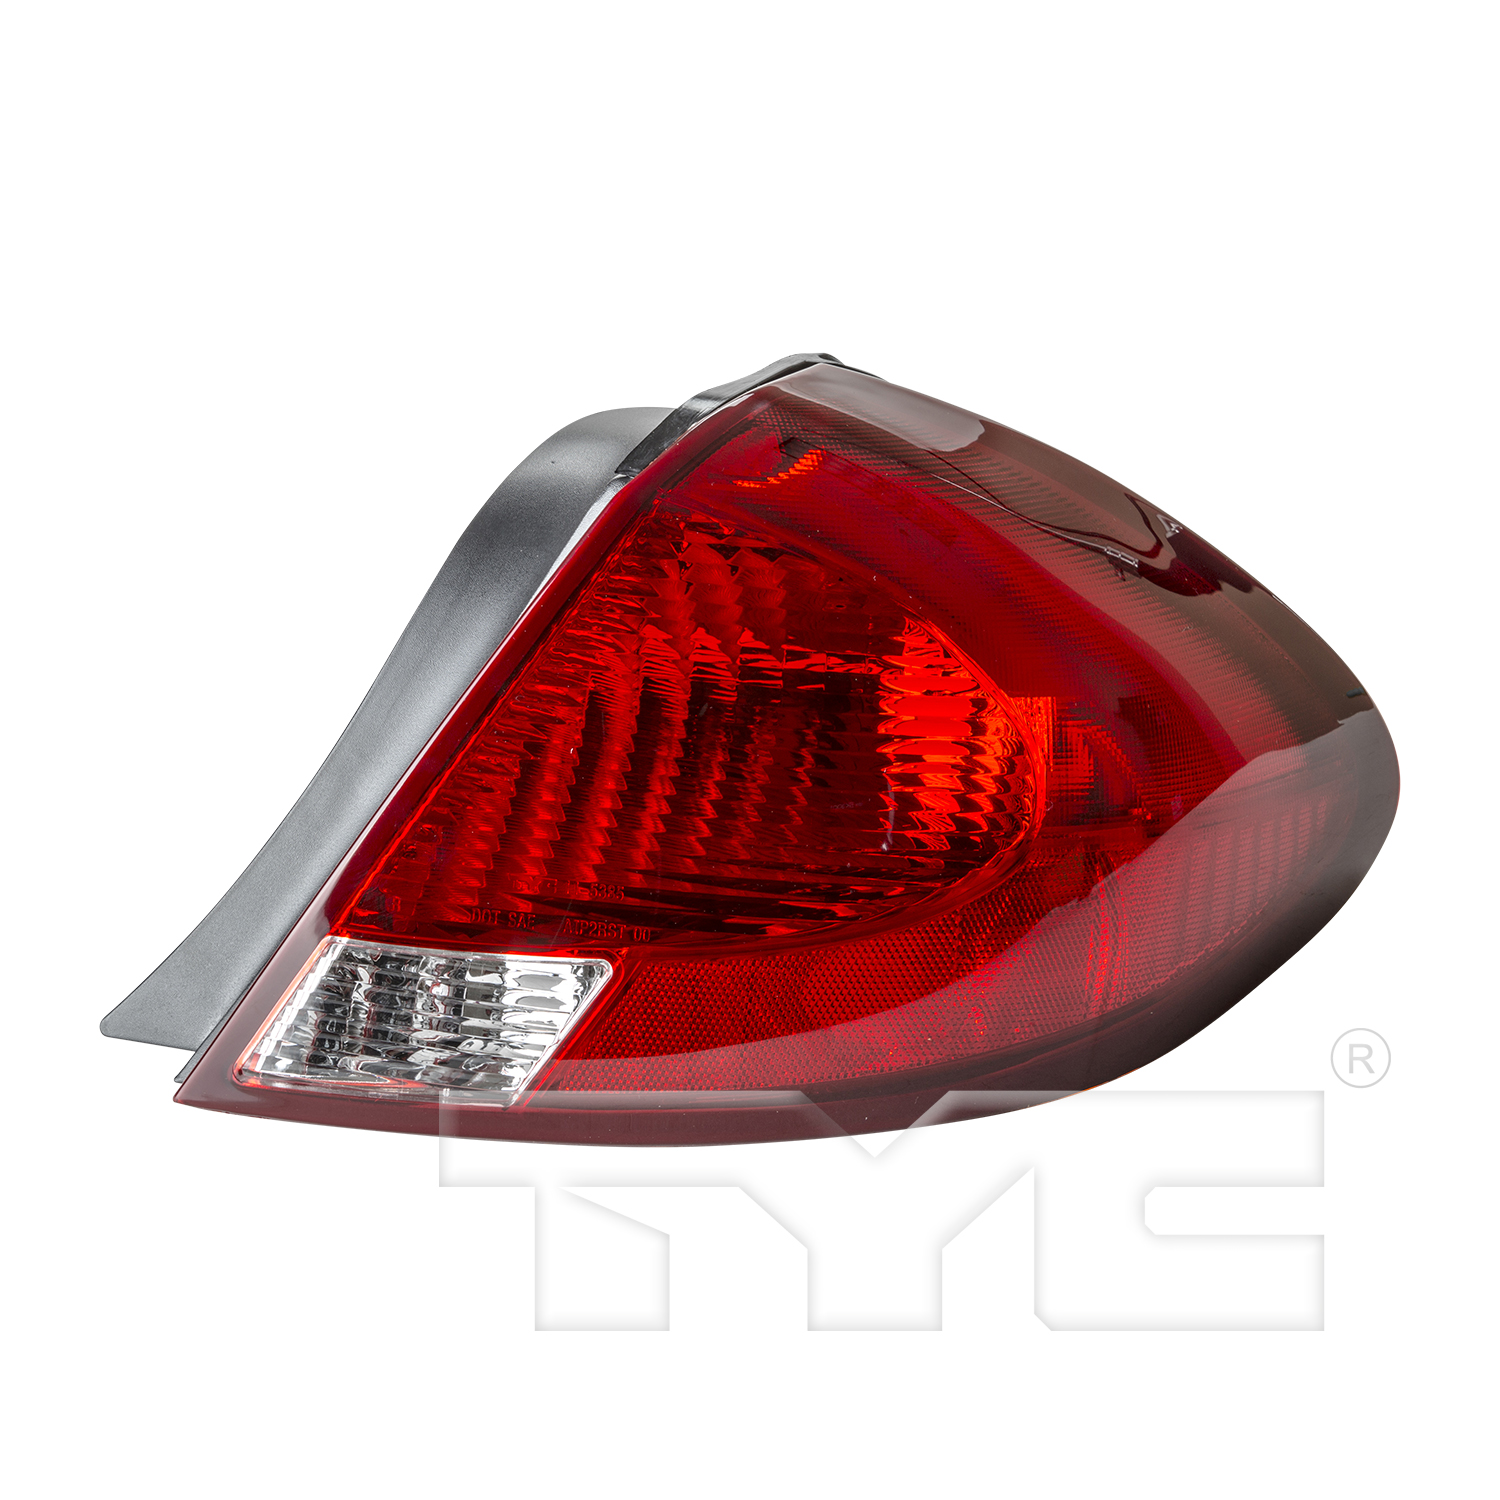 Aftermarket TAILLIGHTS for FORD - TAURUS, TAURUS,00-02,RT Taillamp assy